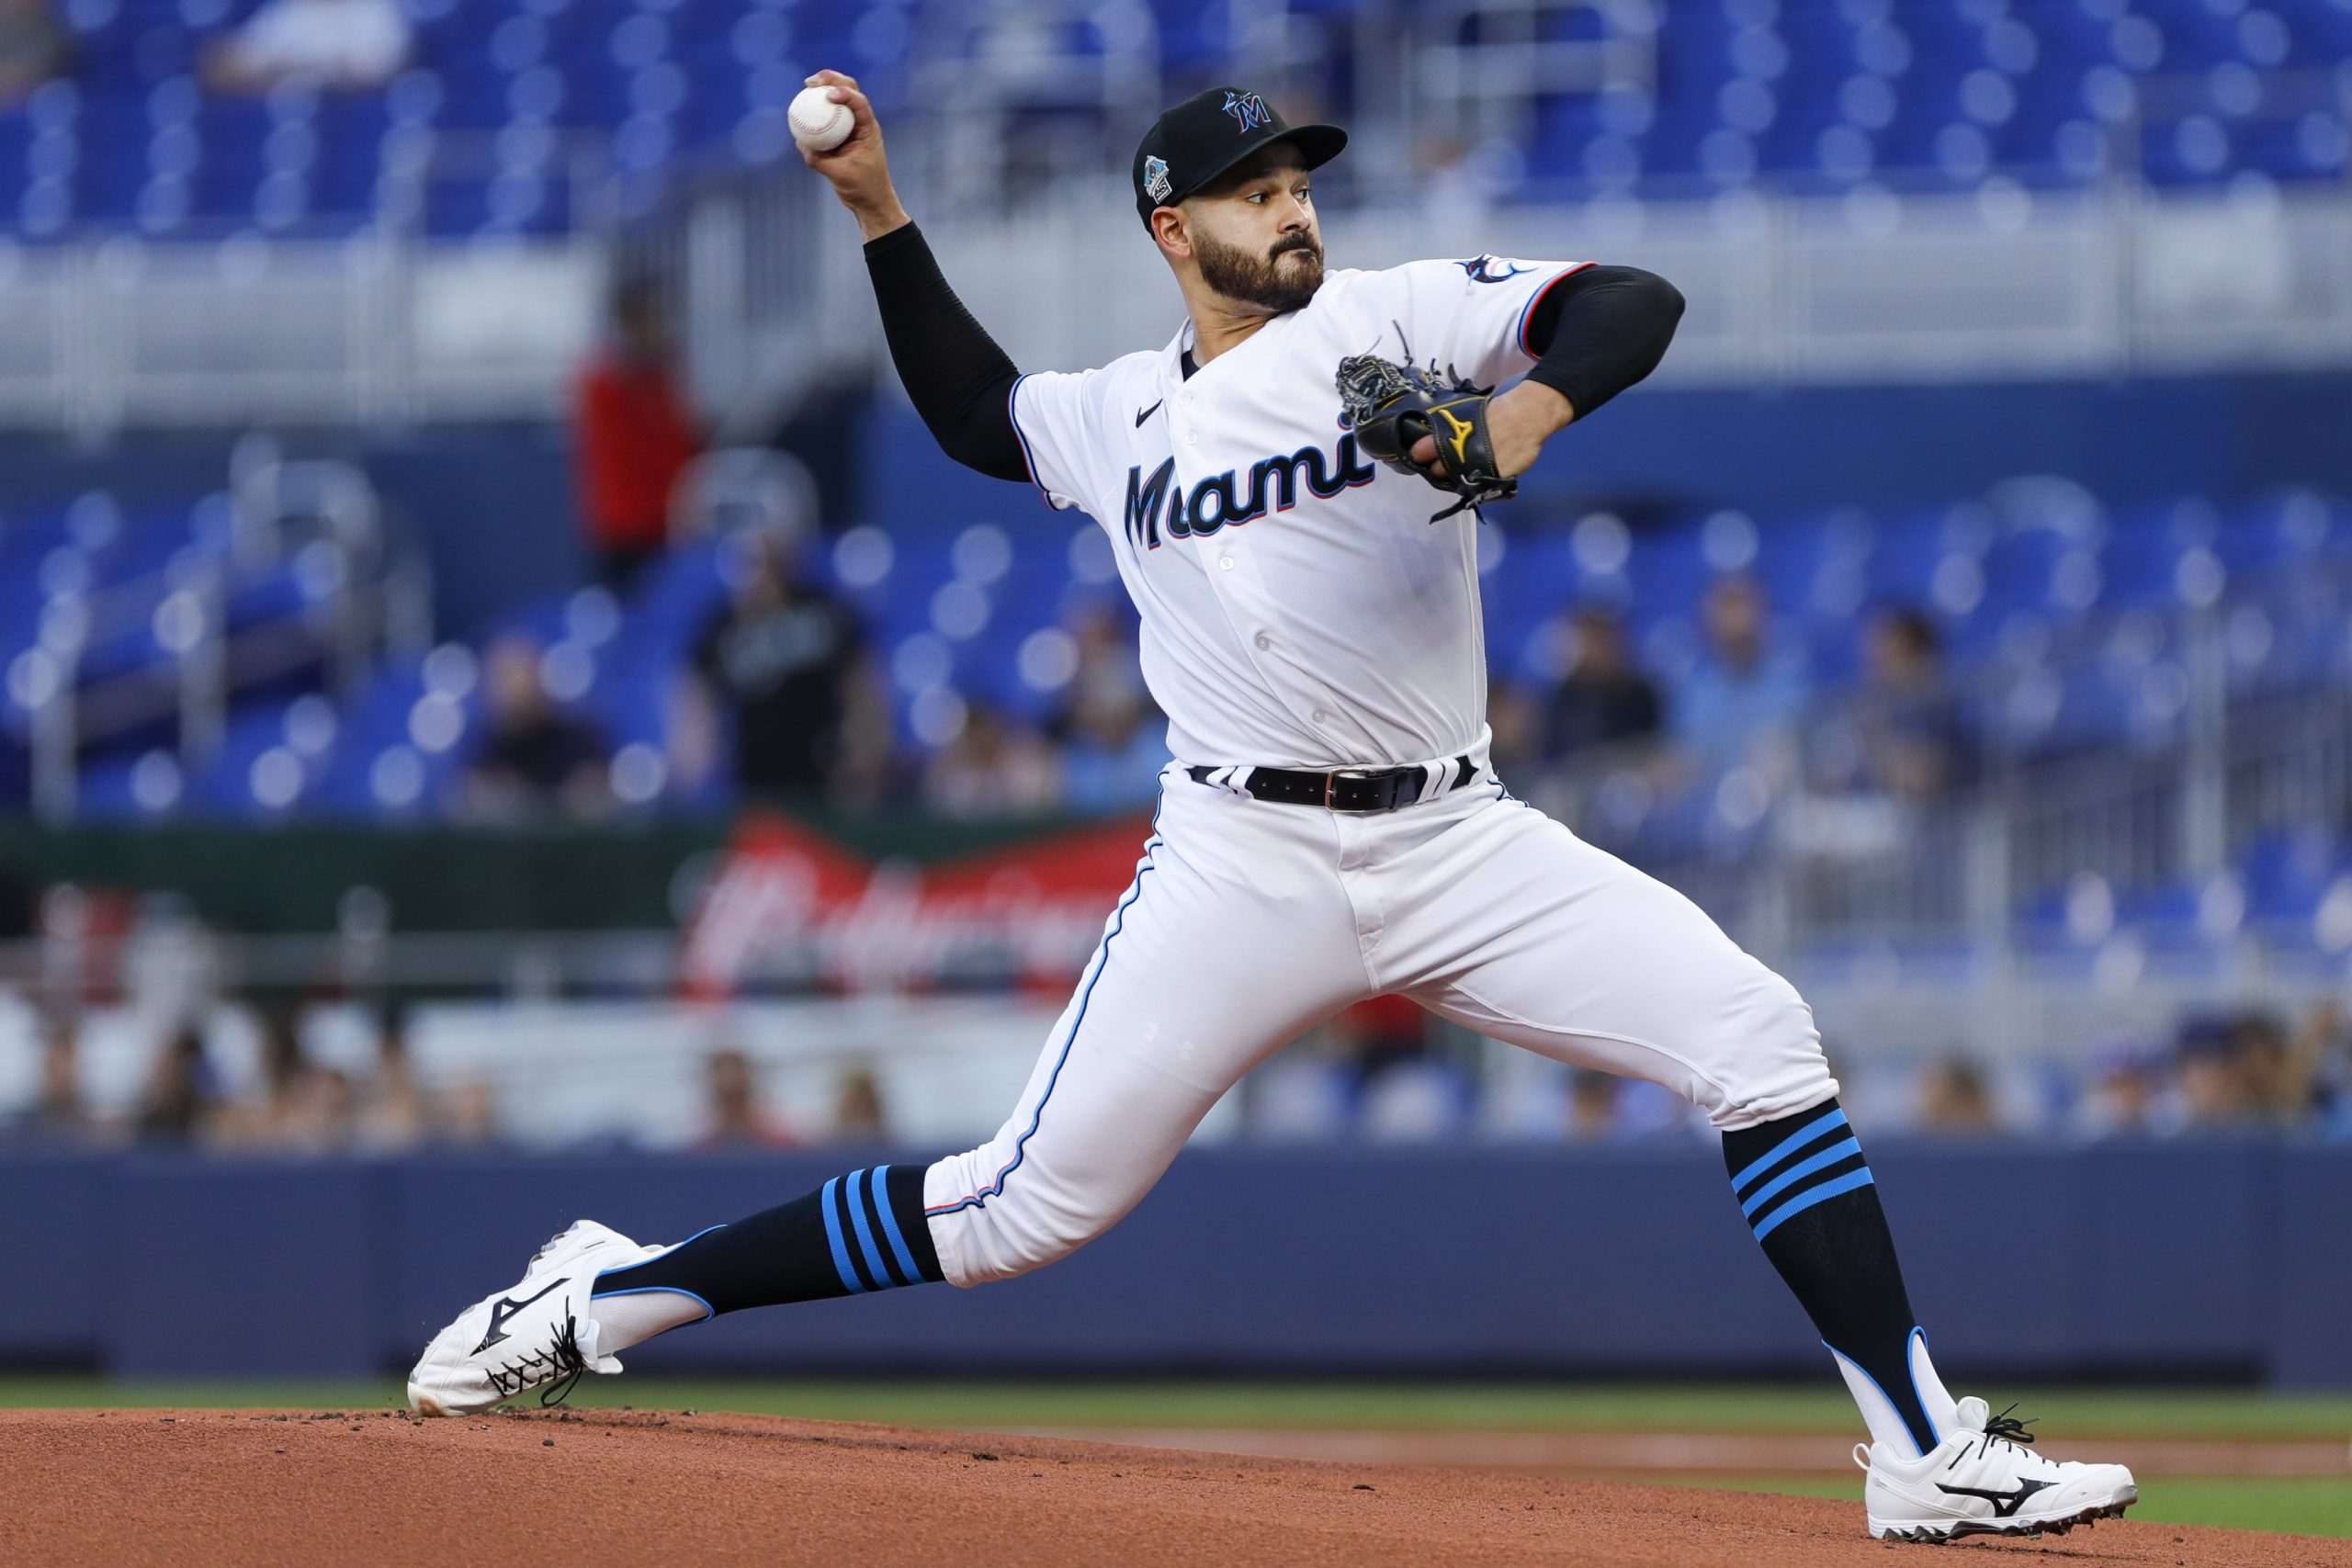 Miami Marlins starting pitcher Pablo Lopez (49) delivers a pitch during the first inning against the Milwaukee Brewers at loanDepot Park.